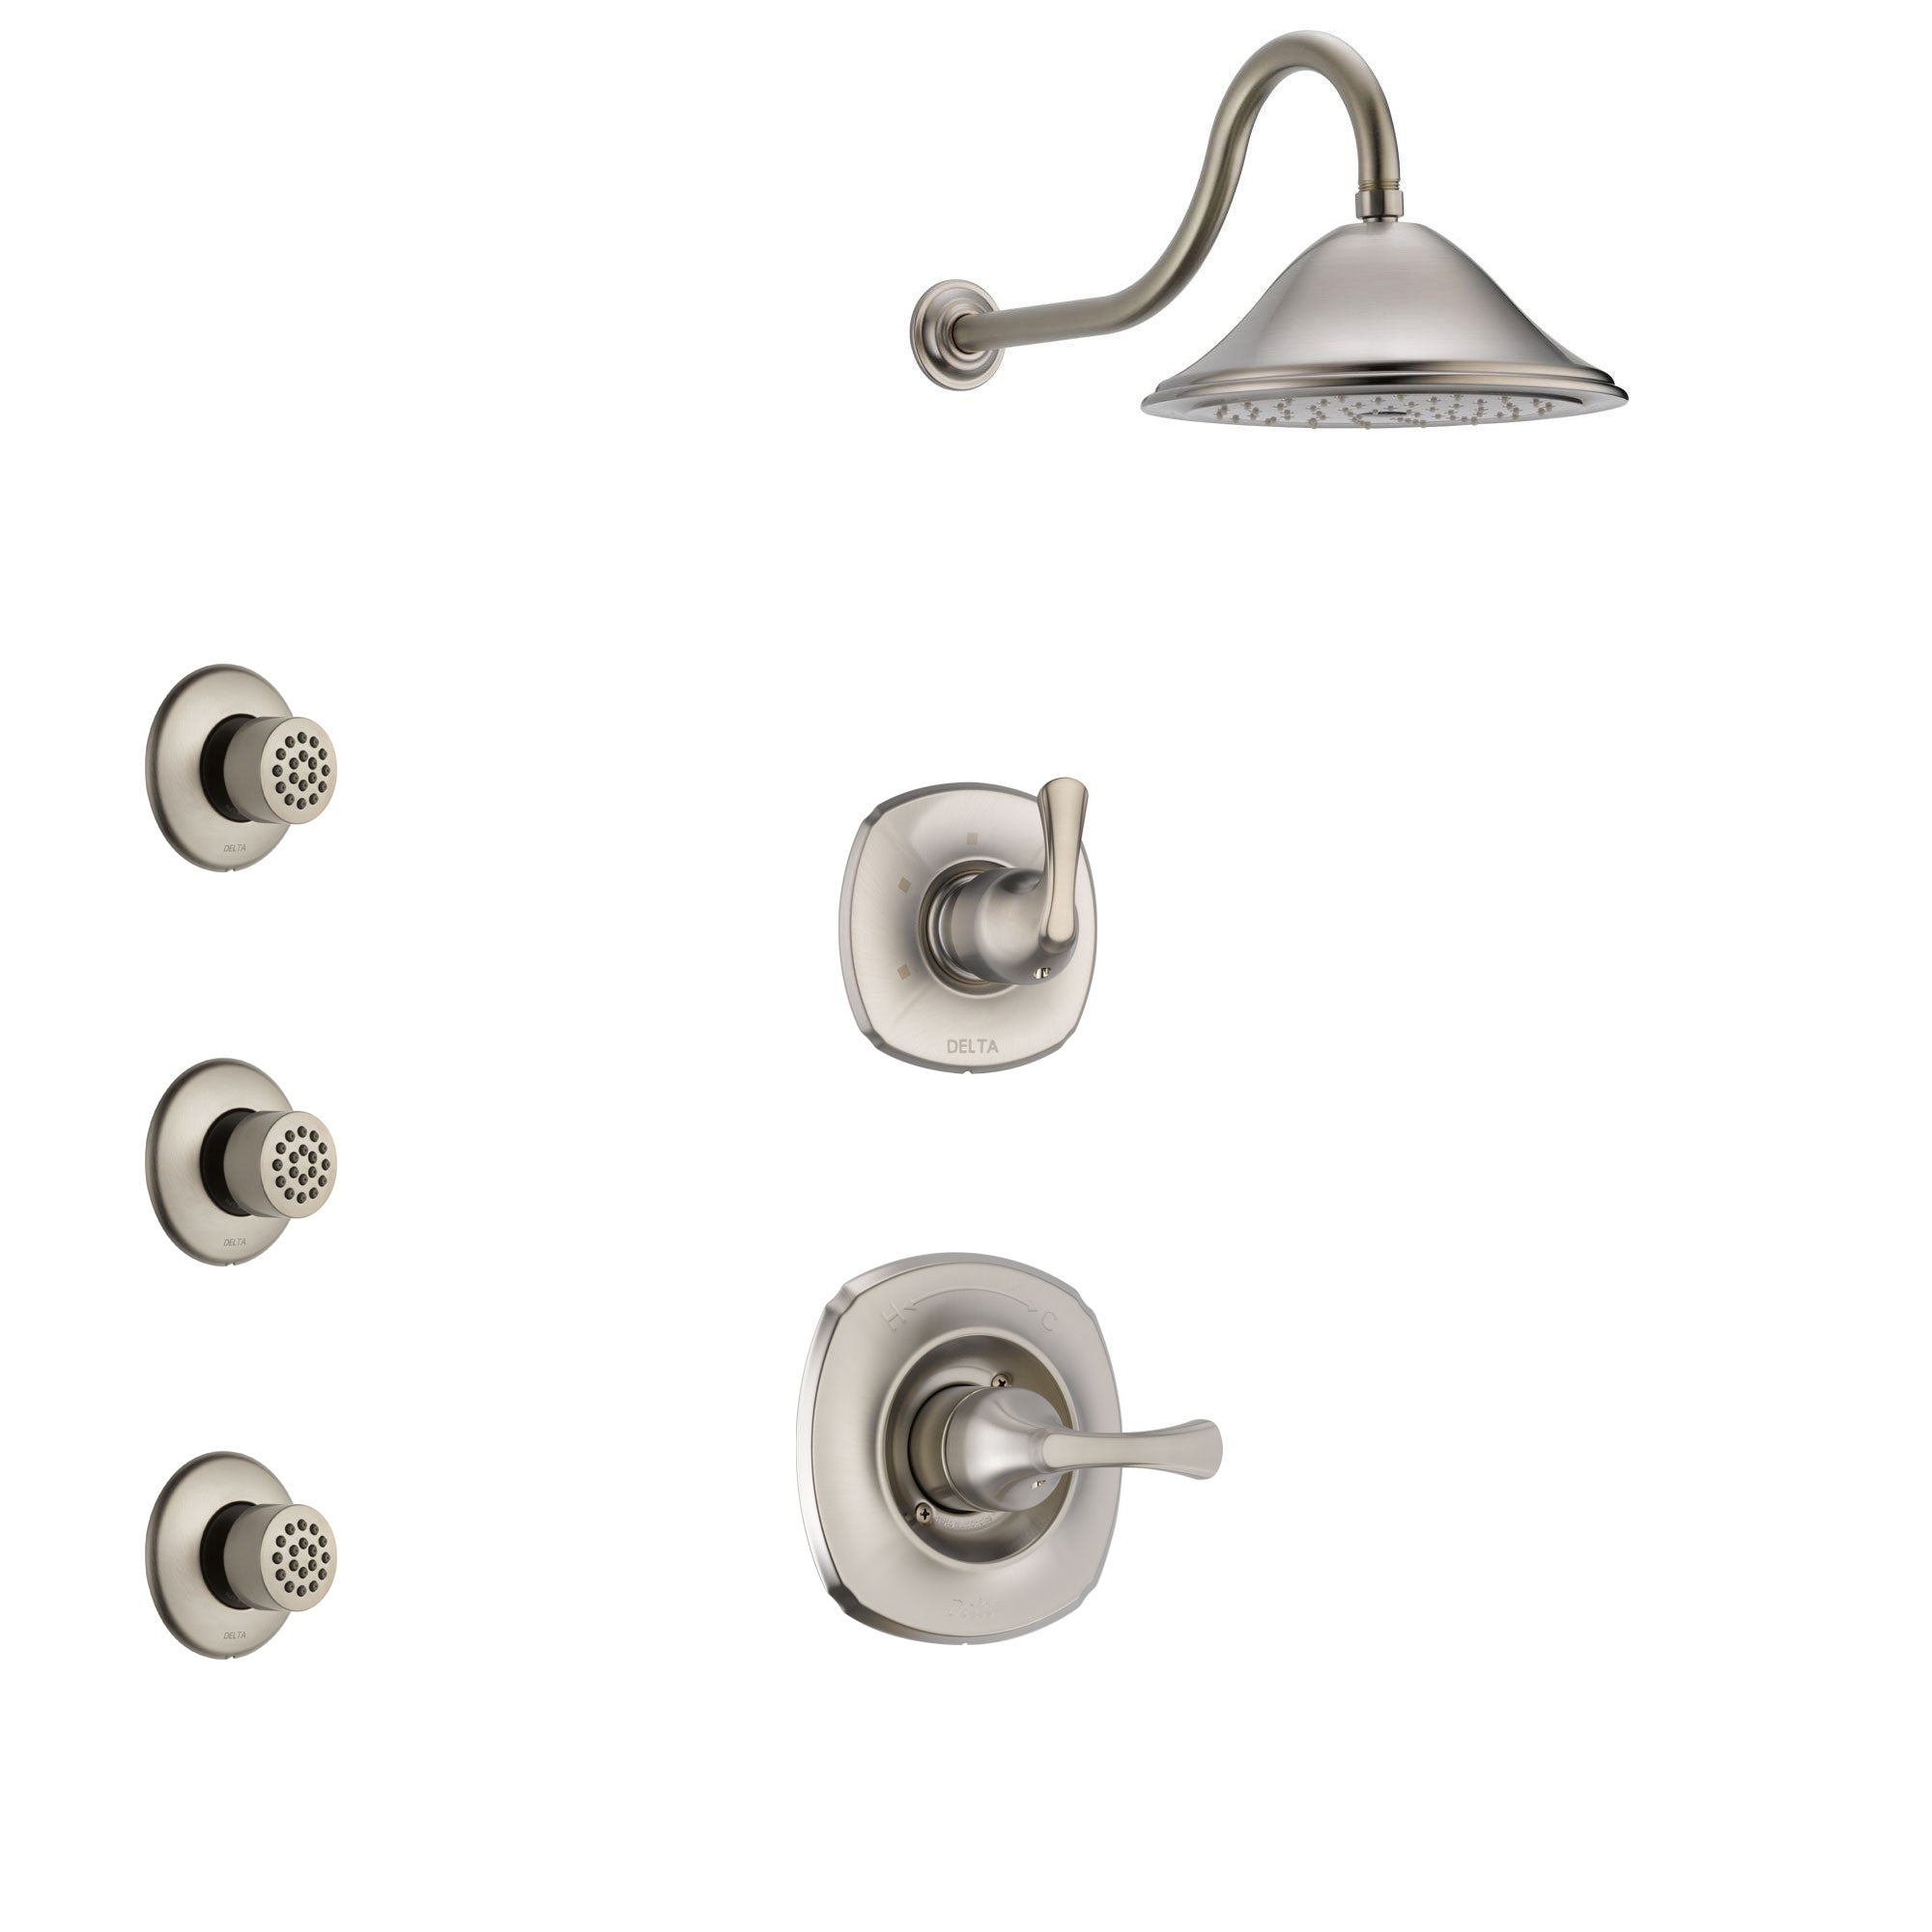 Delta Addison Stainless Steel Finish Shower System with Control Handle, 3-Setting Diverter, Showerhead, and 3 Body Sprays SS1492SS3